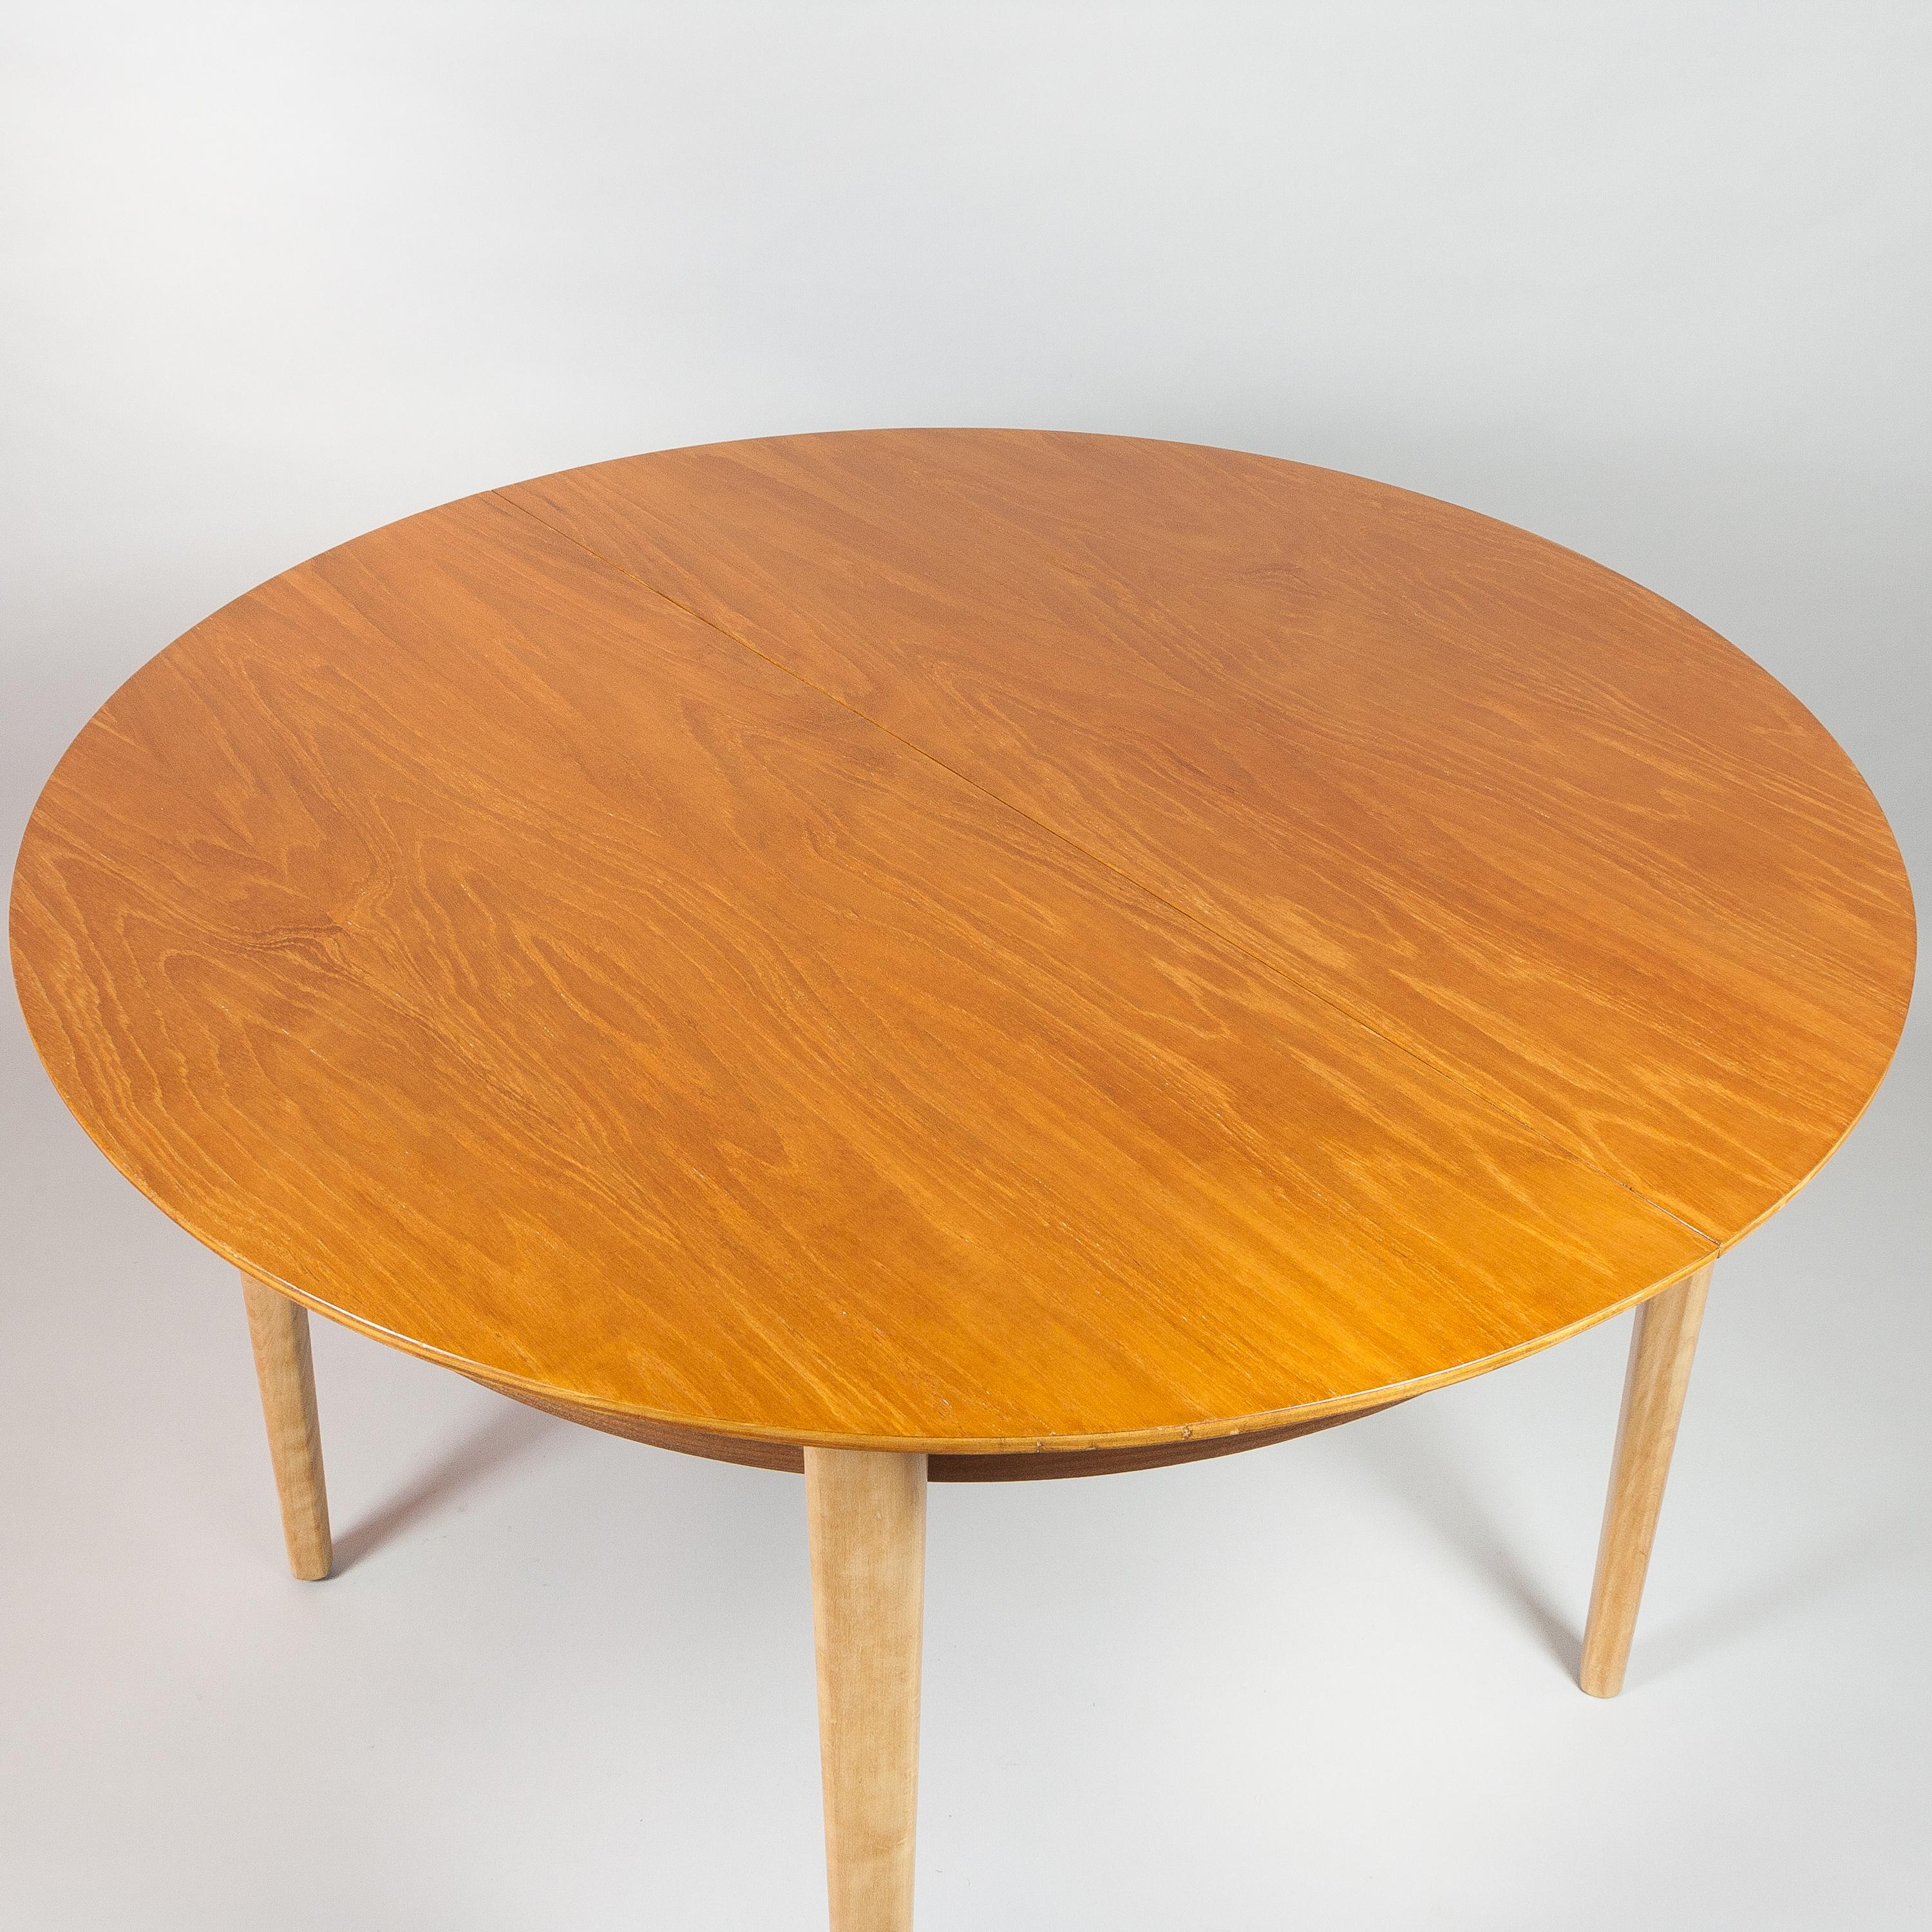 Mid-20th Century Model TB05 Teak and Maple Dining Table by Cees Braakman for Pastoe, 1950s